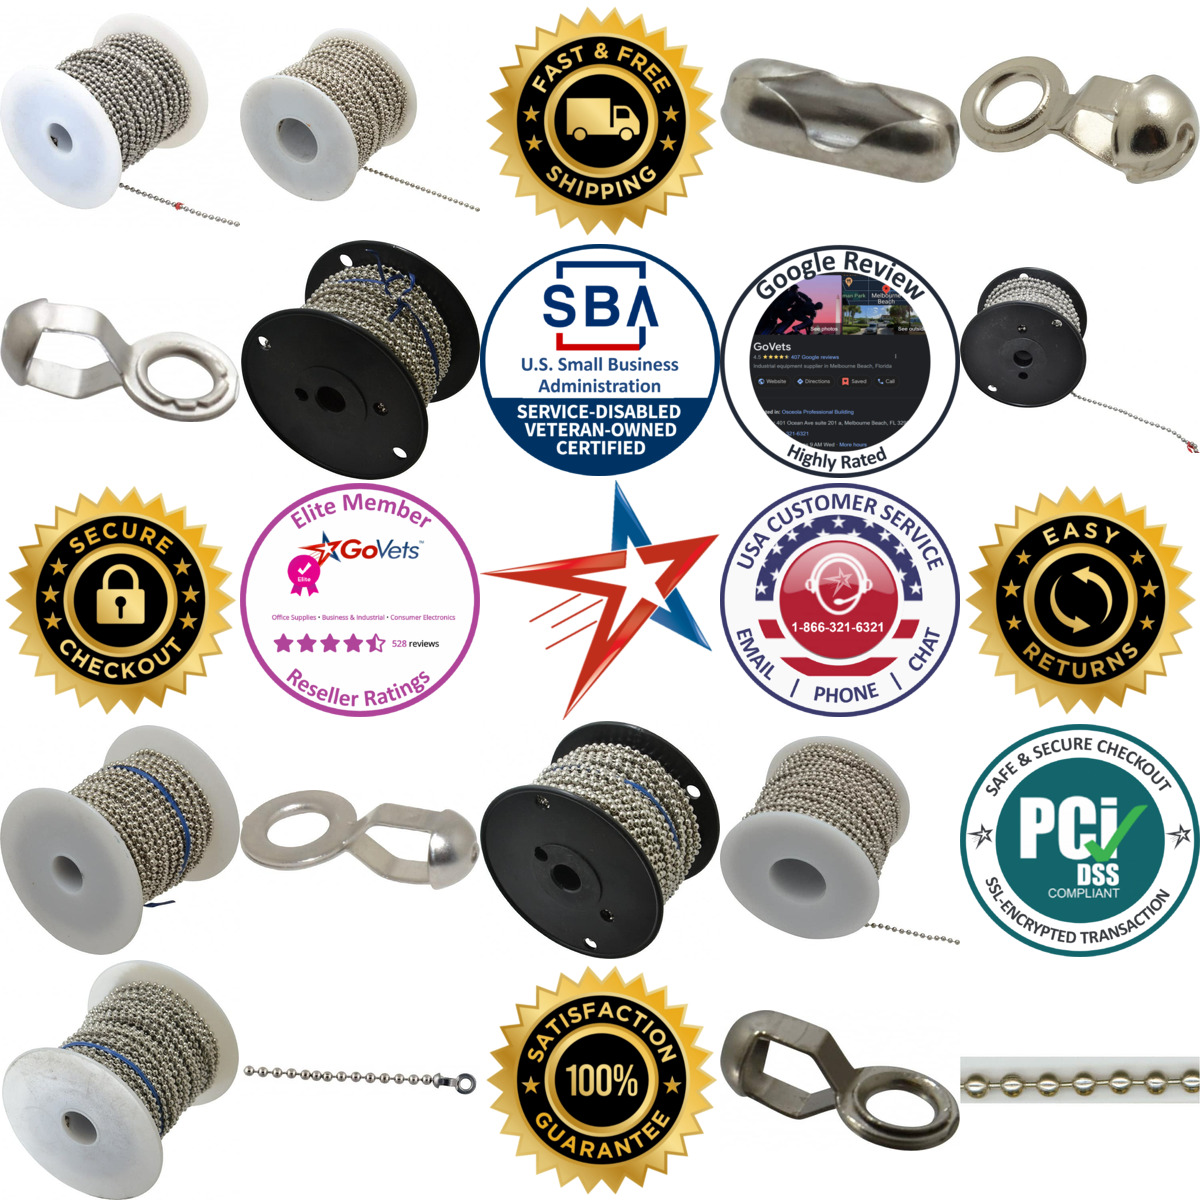 A selection of Ball Chain and Accessories products on GoVets